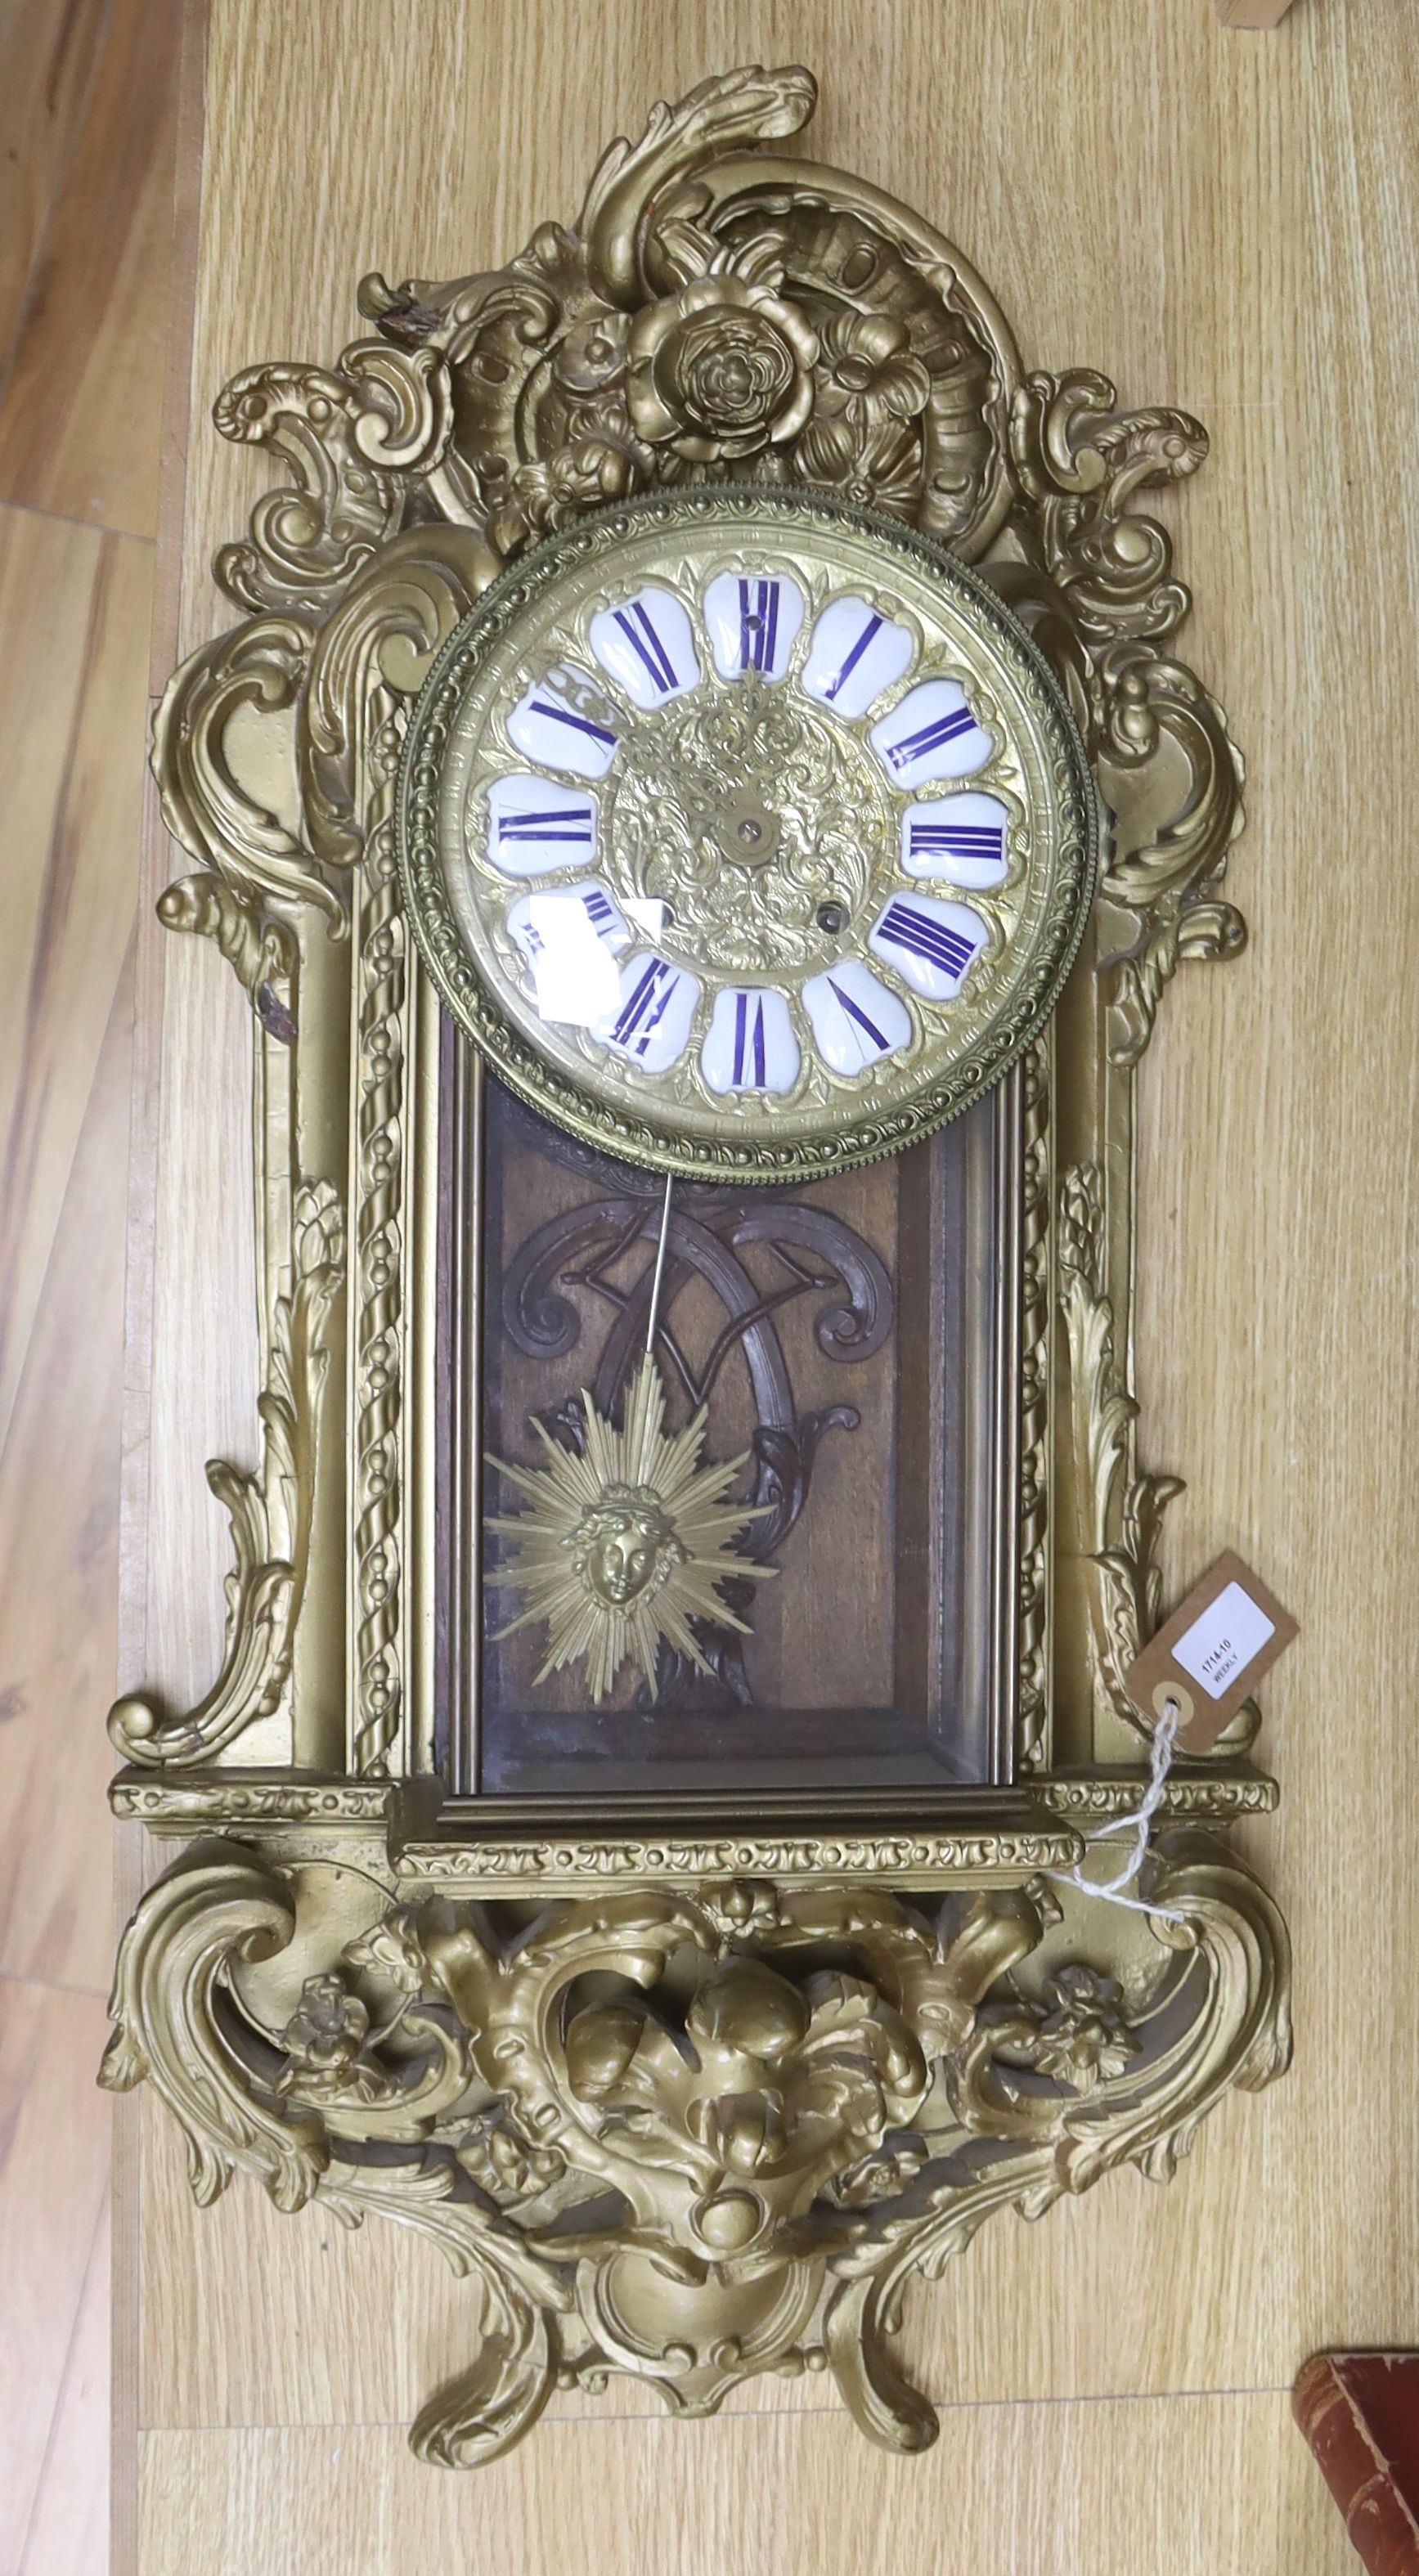 A 19th century French gilt and composition wall clock, with scrolled acanthus carving and '